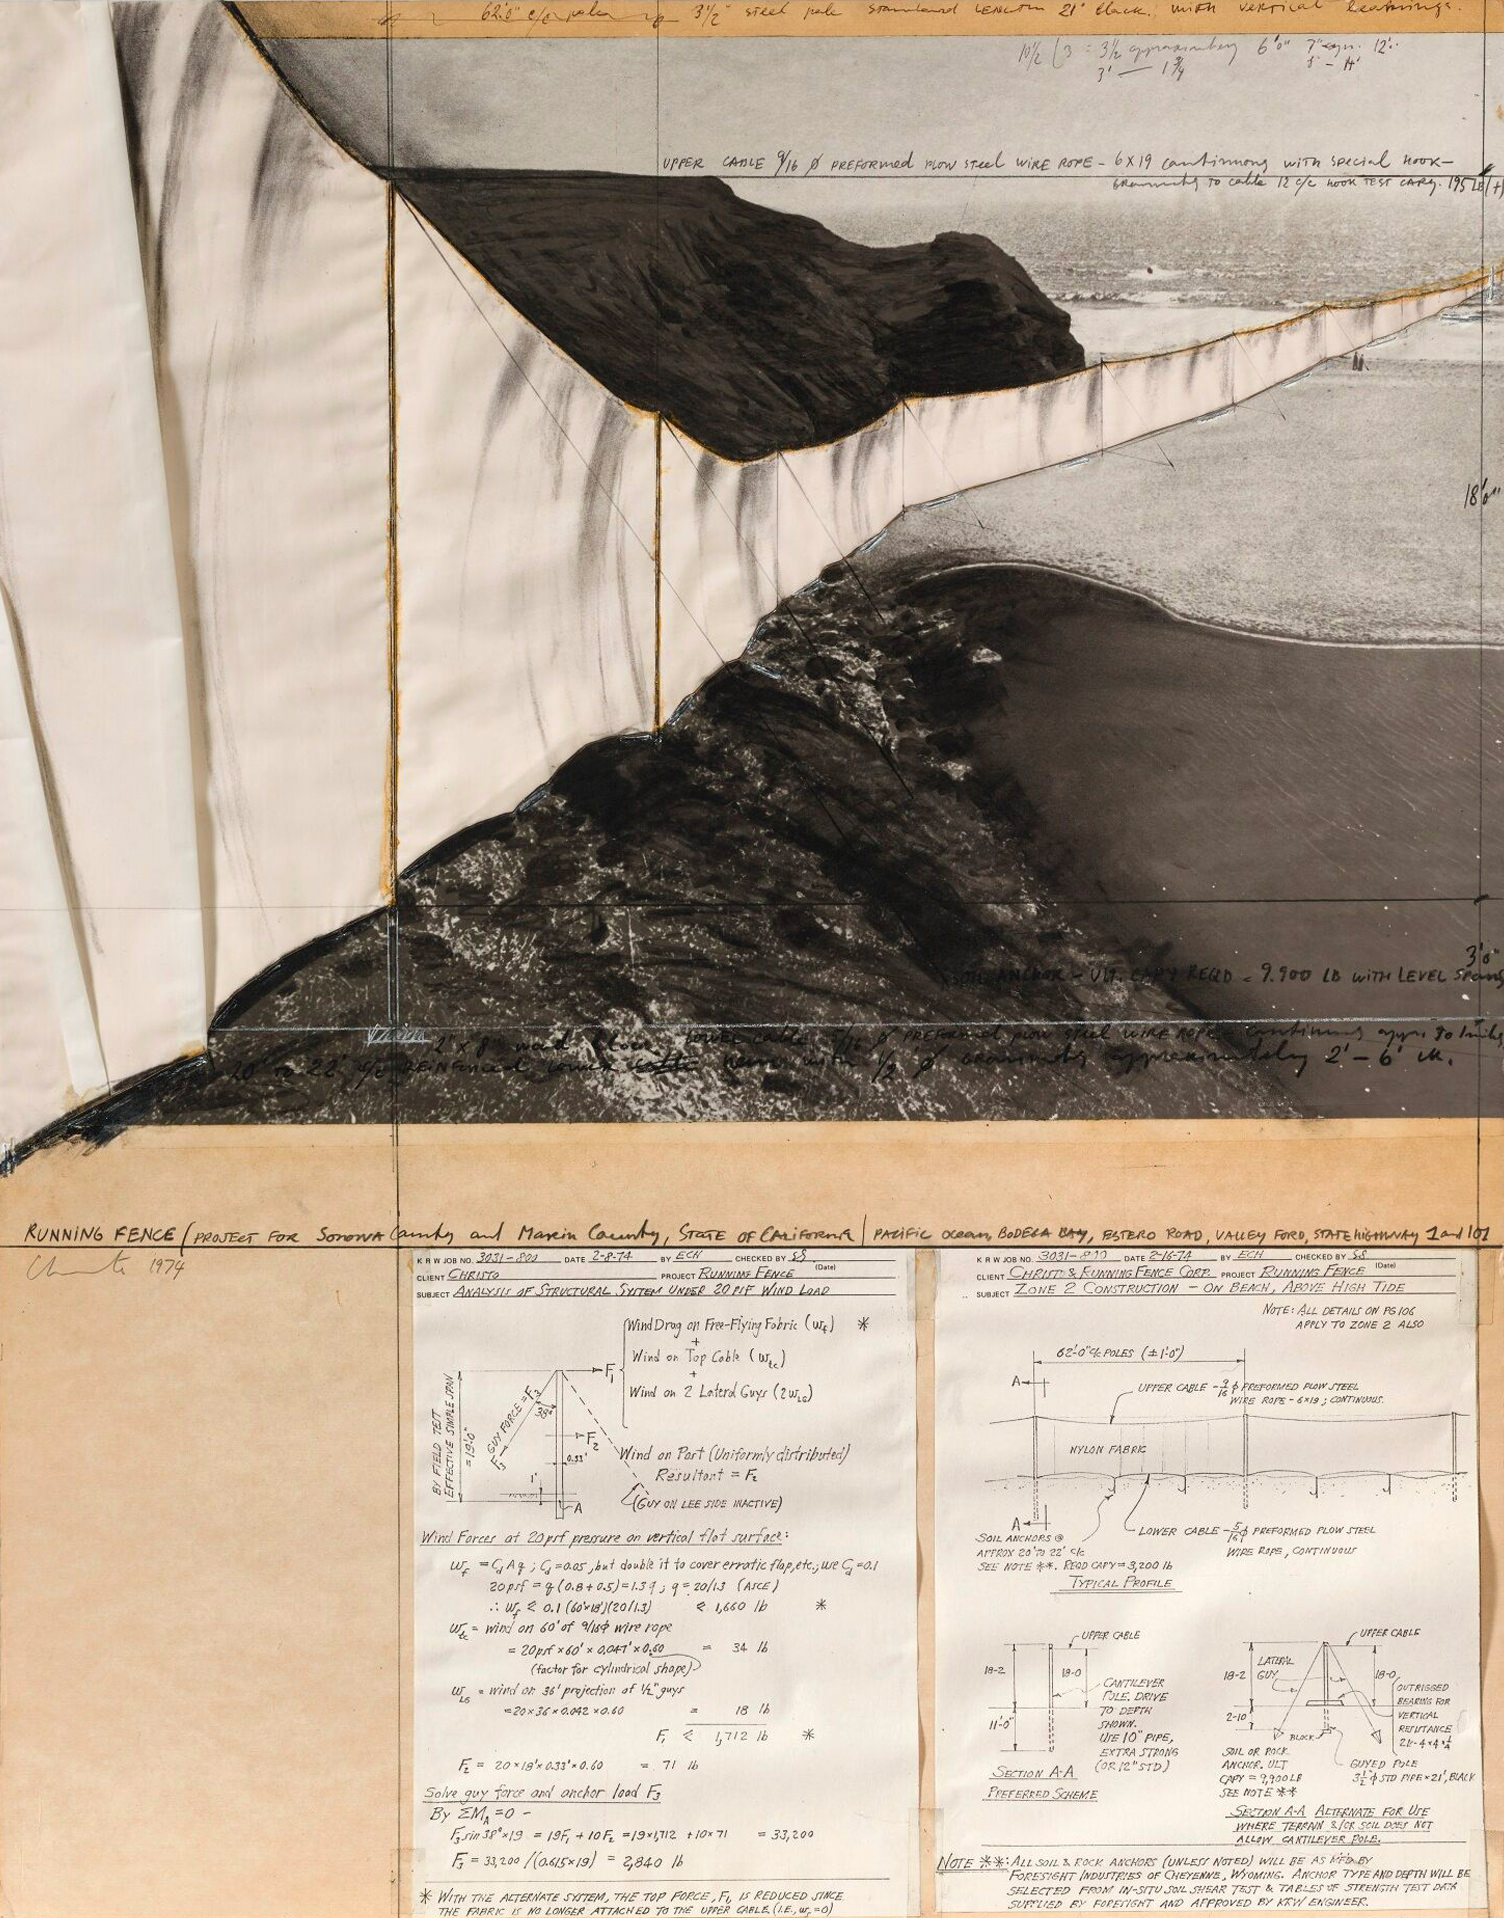 Christo. Running Fence, Project for Sorona County and Maxin County, State of California/Pacific Ocean, Bodega Bay, Estero Road, Valley Ford, State Highway 1 and 101, 1974